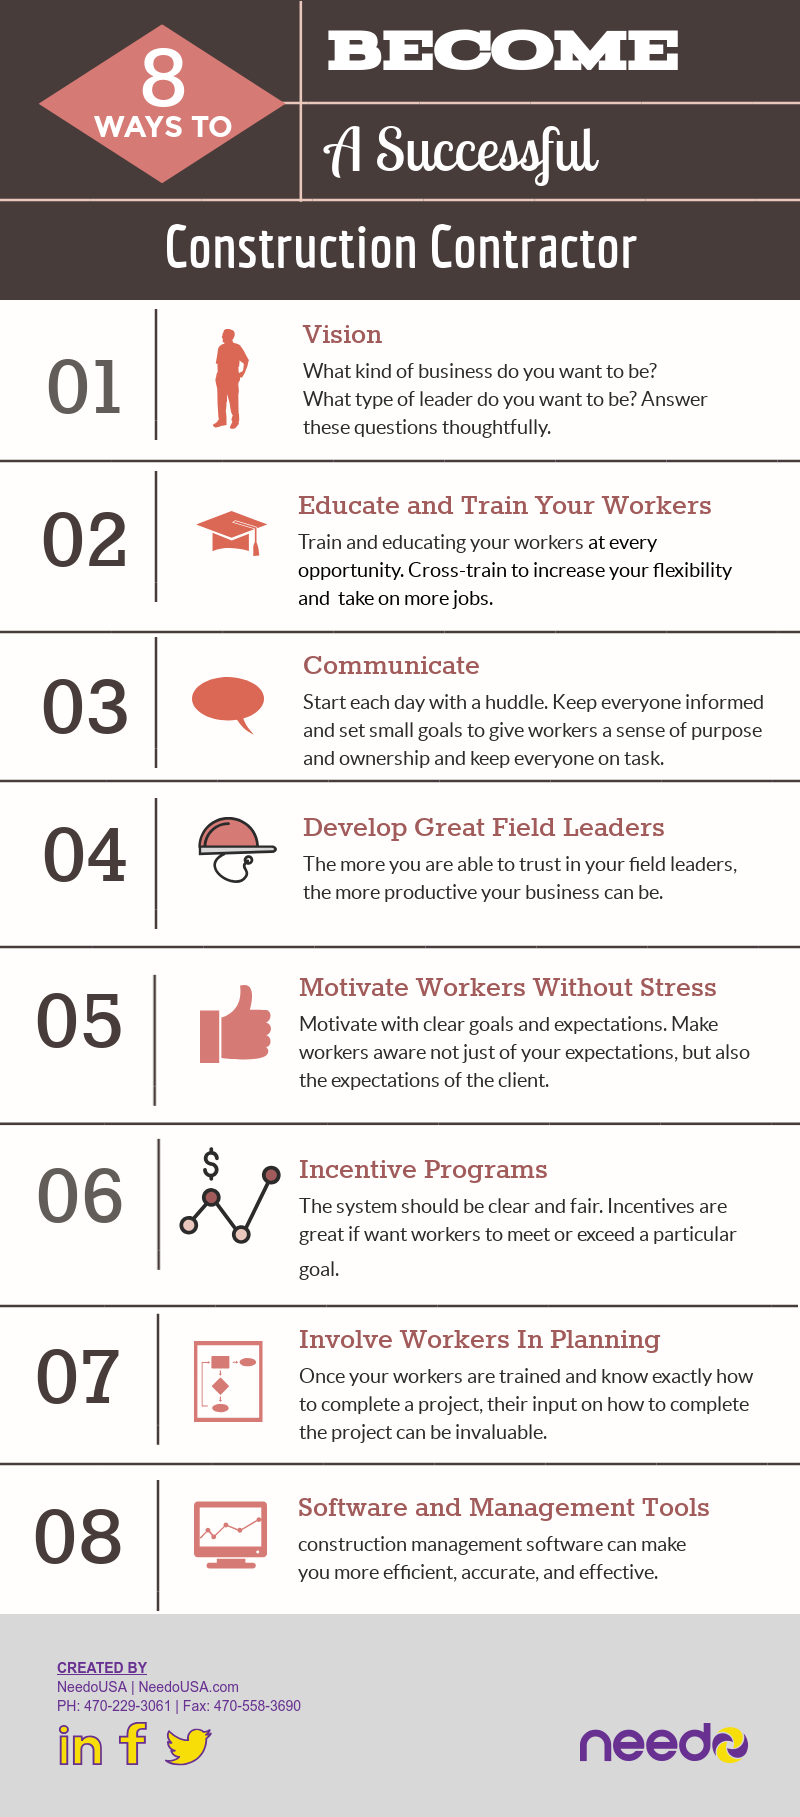 How to Become a Successful Construction Contractor [infographic]